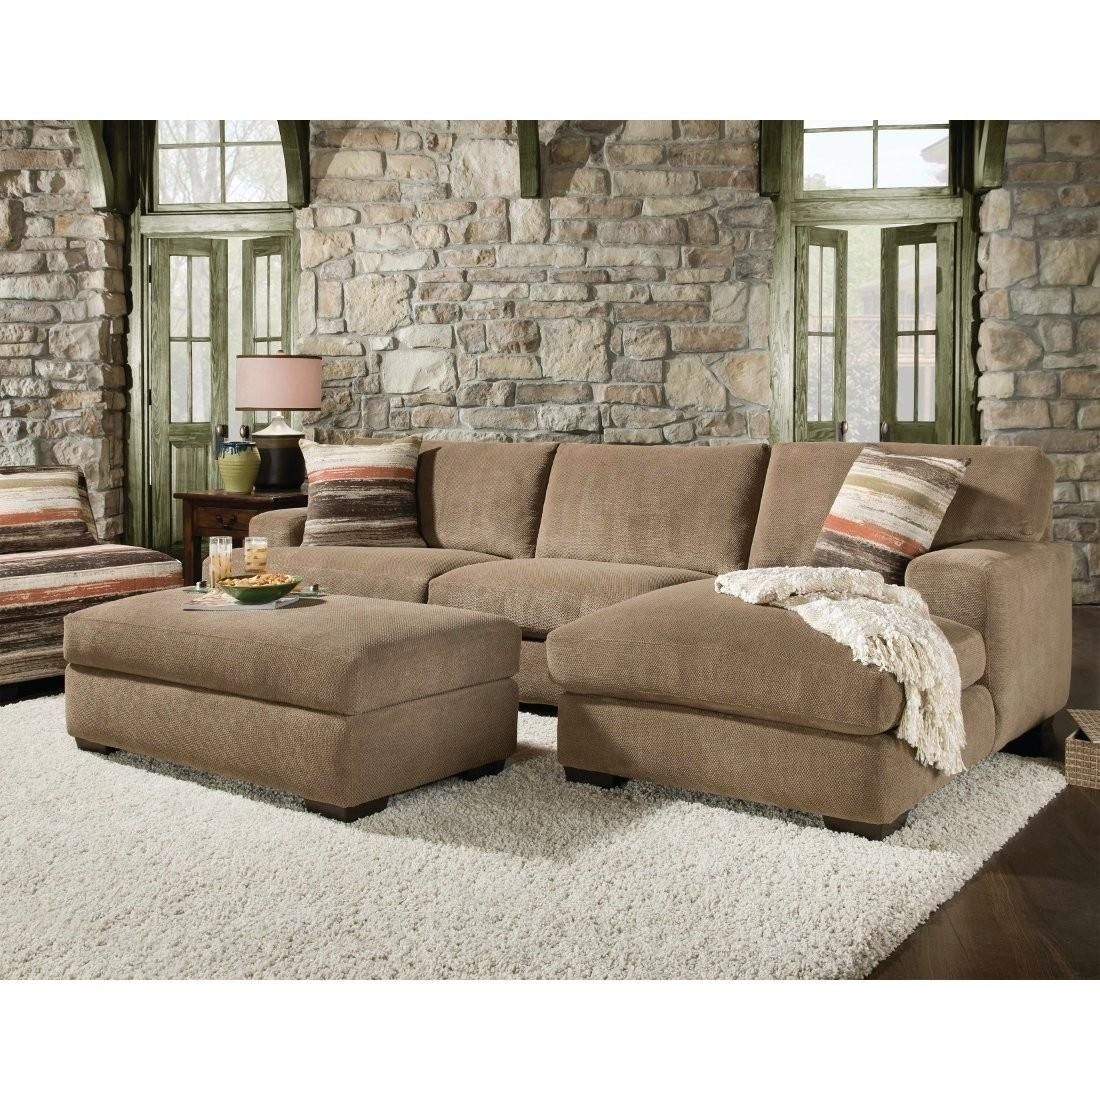 2018 Latest Down Filled Sofas And Sectionals | Sofa Ideas With Down Filled Sofas (View 5 of 10)